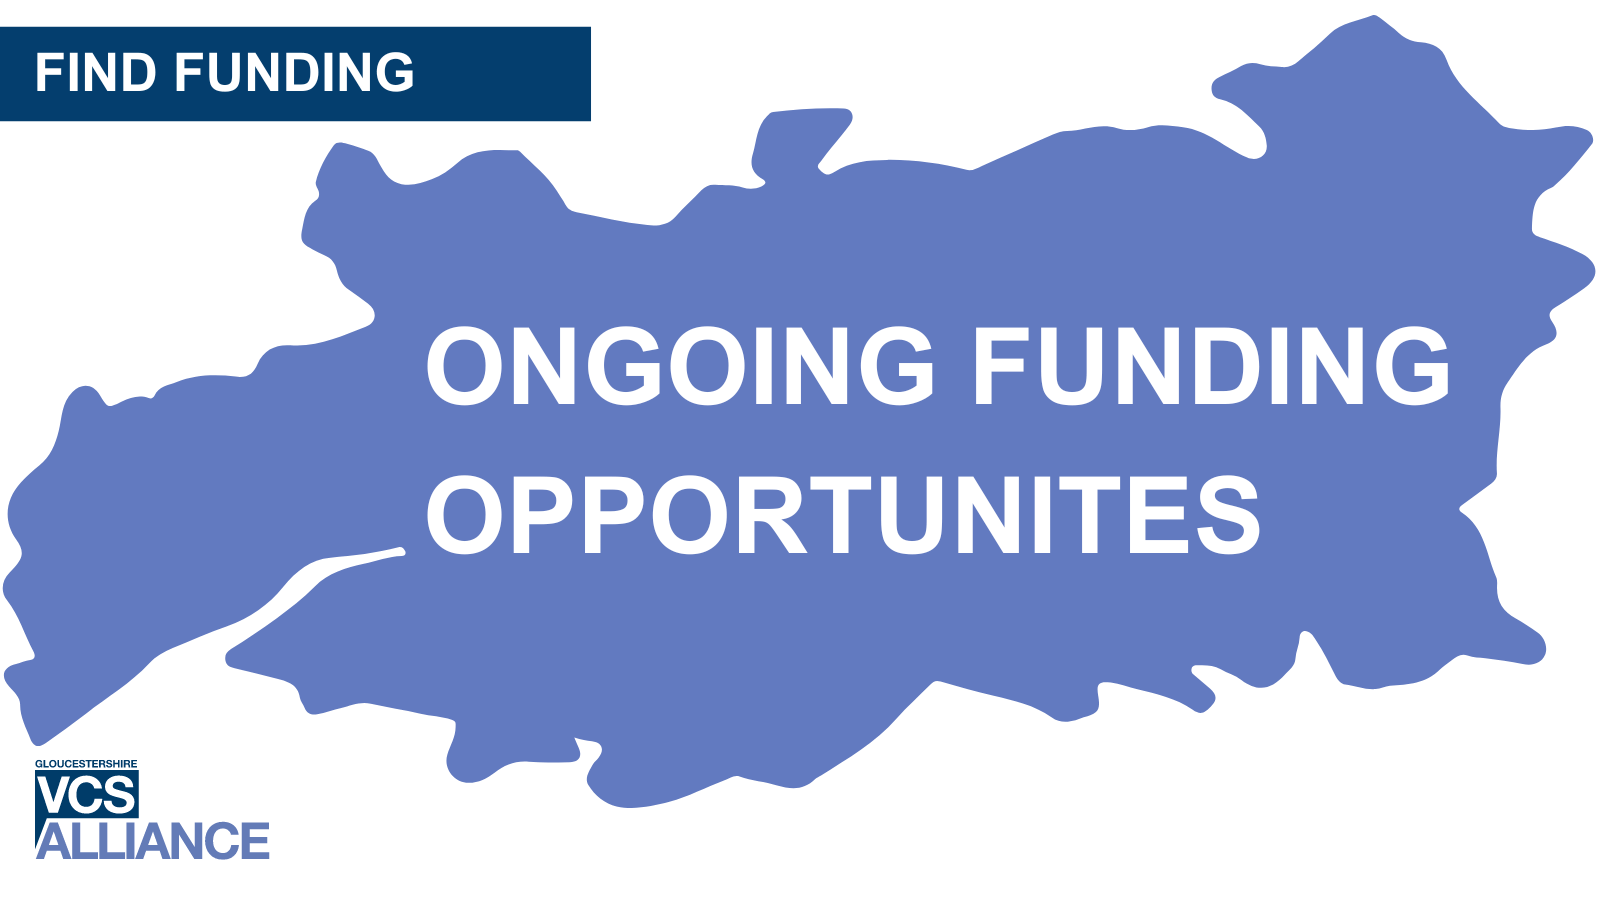 Words: 'Find Funding. Ongoing Funding Opportunities' with outline map of the county of Gloucestershire in the background